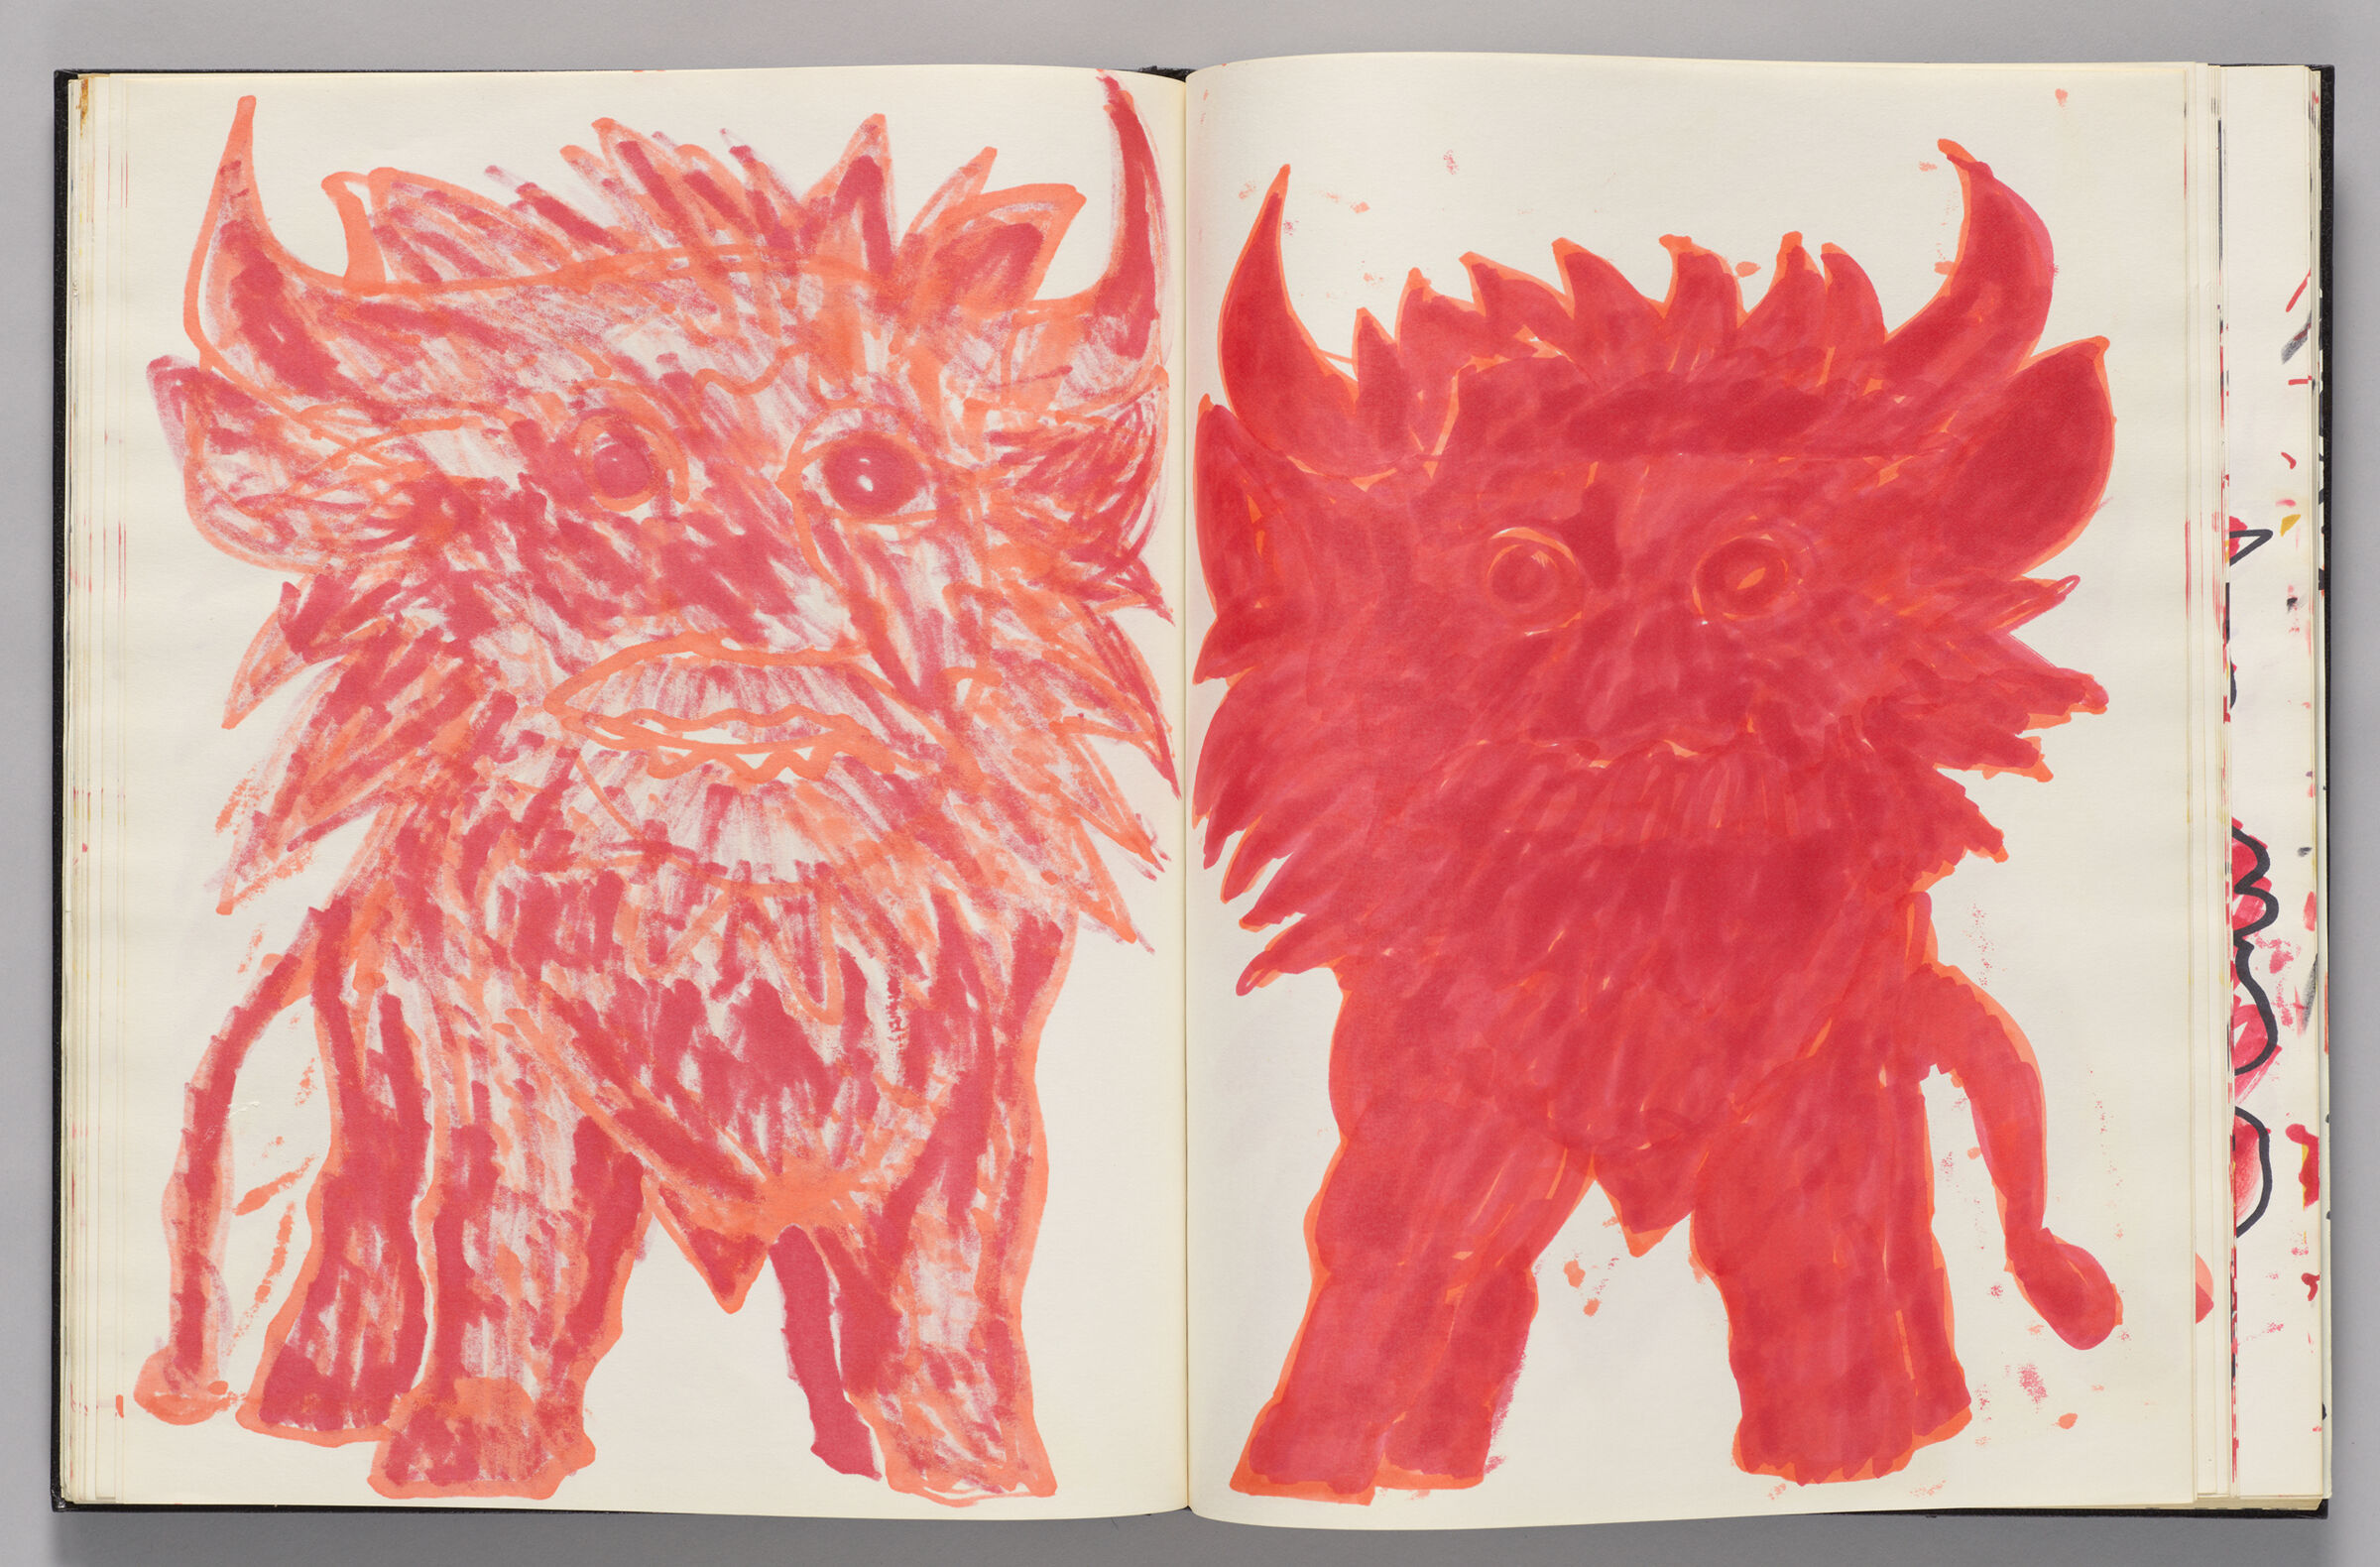 Untitled (Bleed-Through Of Previous Page, Left Page); Untitled (Minotaur, Right Page)